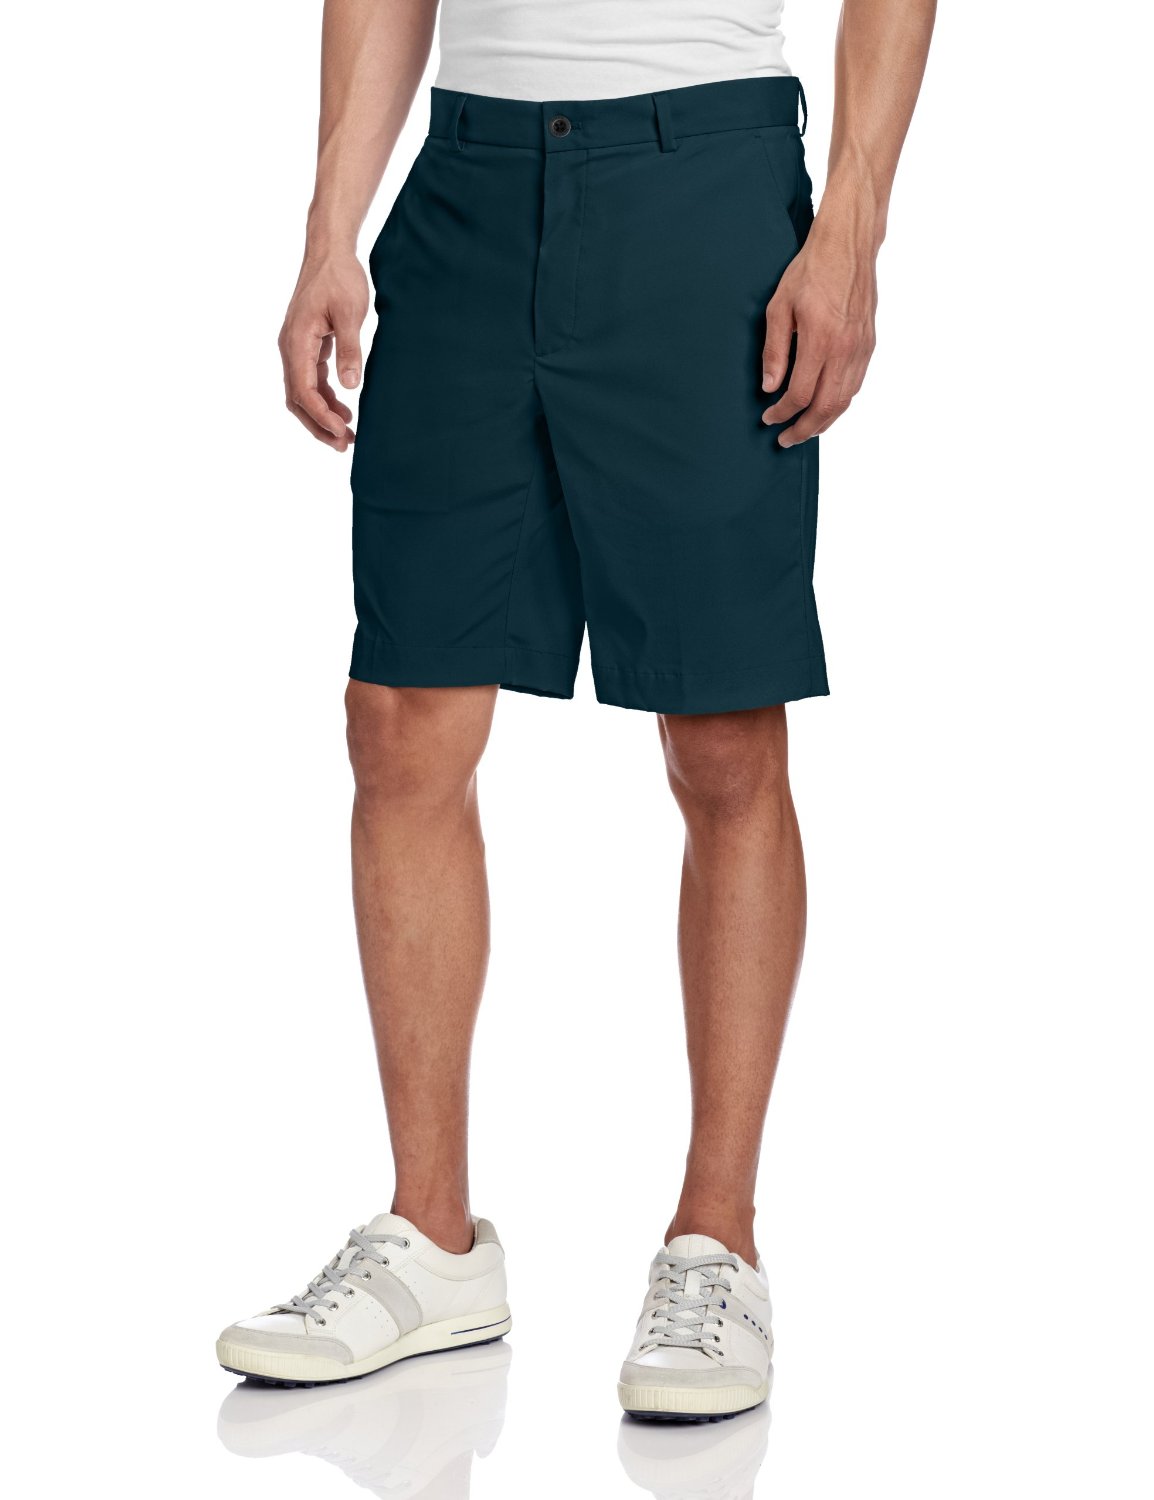 Buy Mens Golf Shorts for Lowest Prices Online!